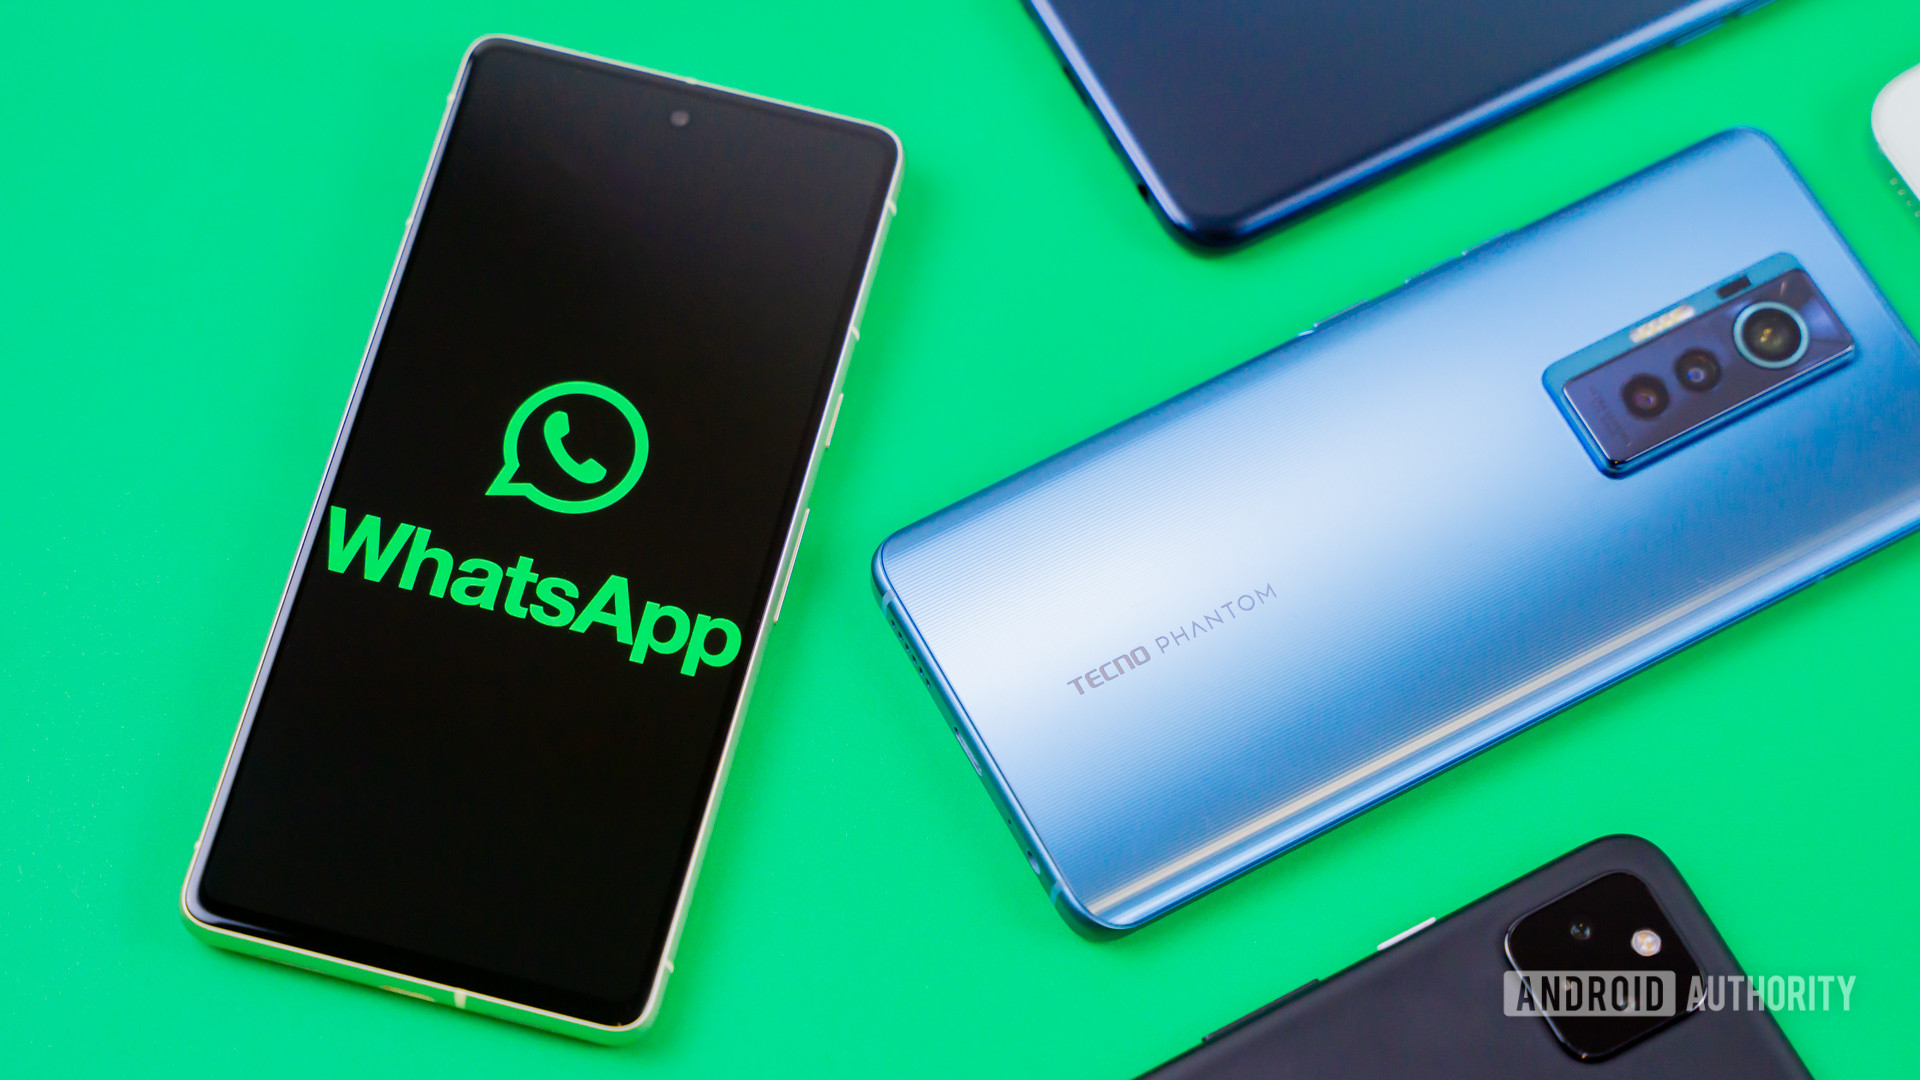 WhatsApp could soon let you keep your chats protected across devices